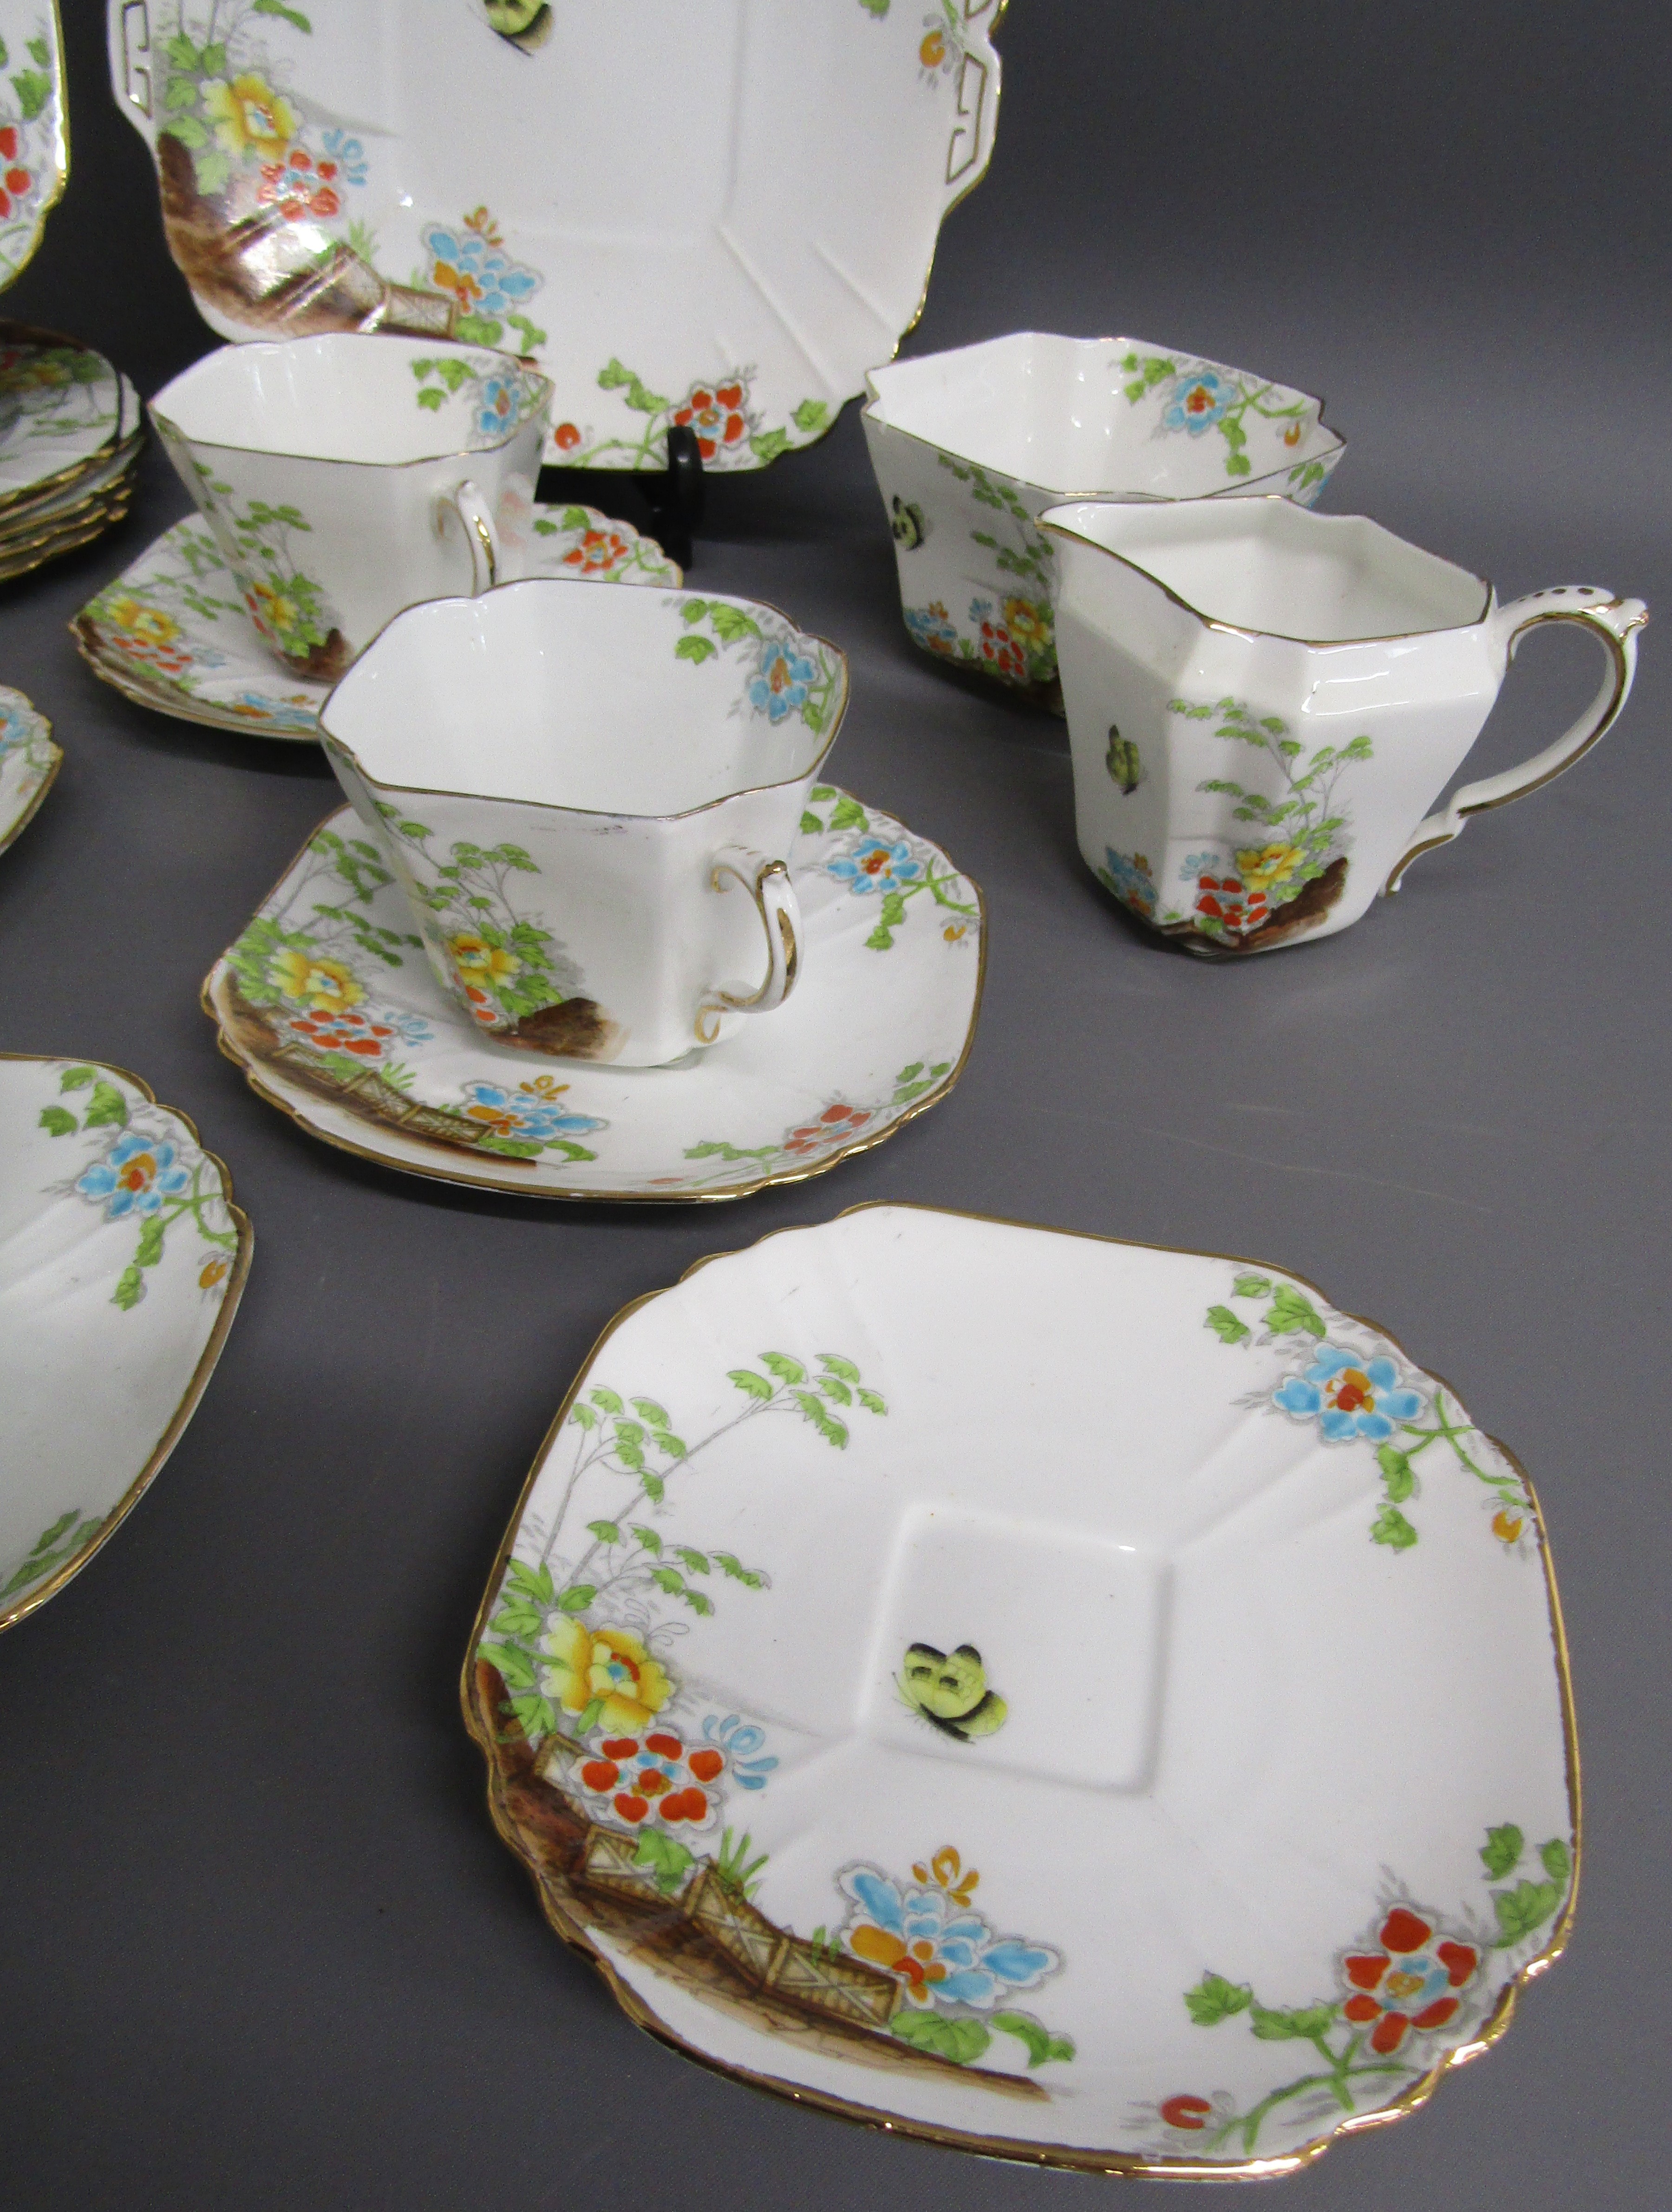 Victoria C & E bone China teacups, saucers, cake plates, side plates (one repaired), sugar bowl - Image 4 of 5